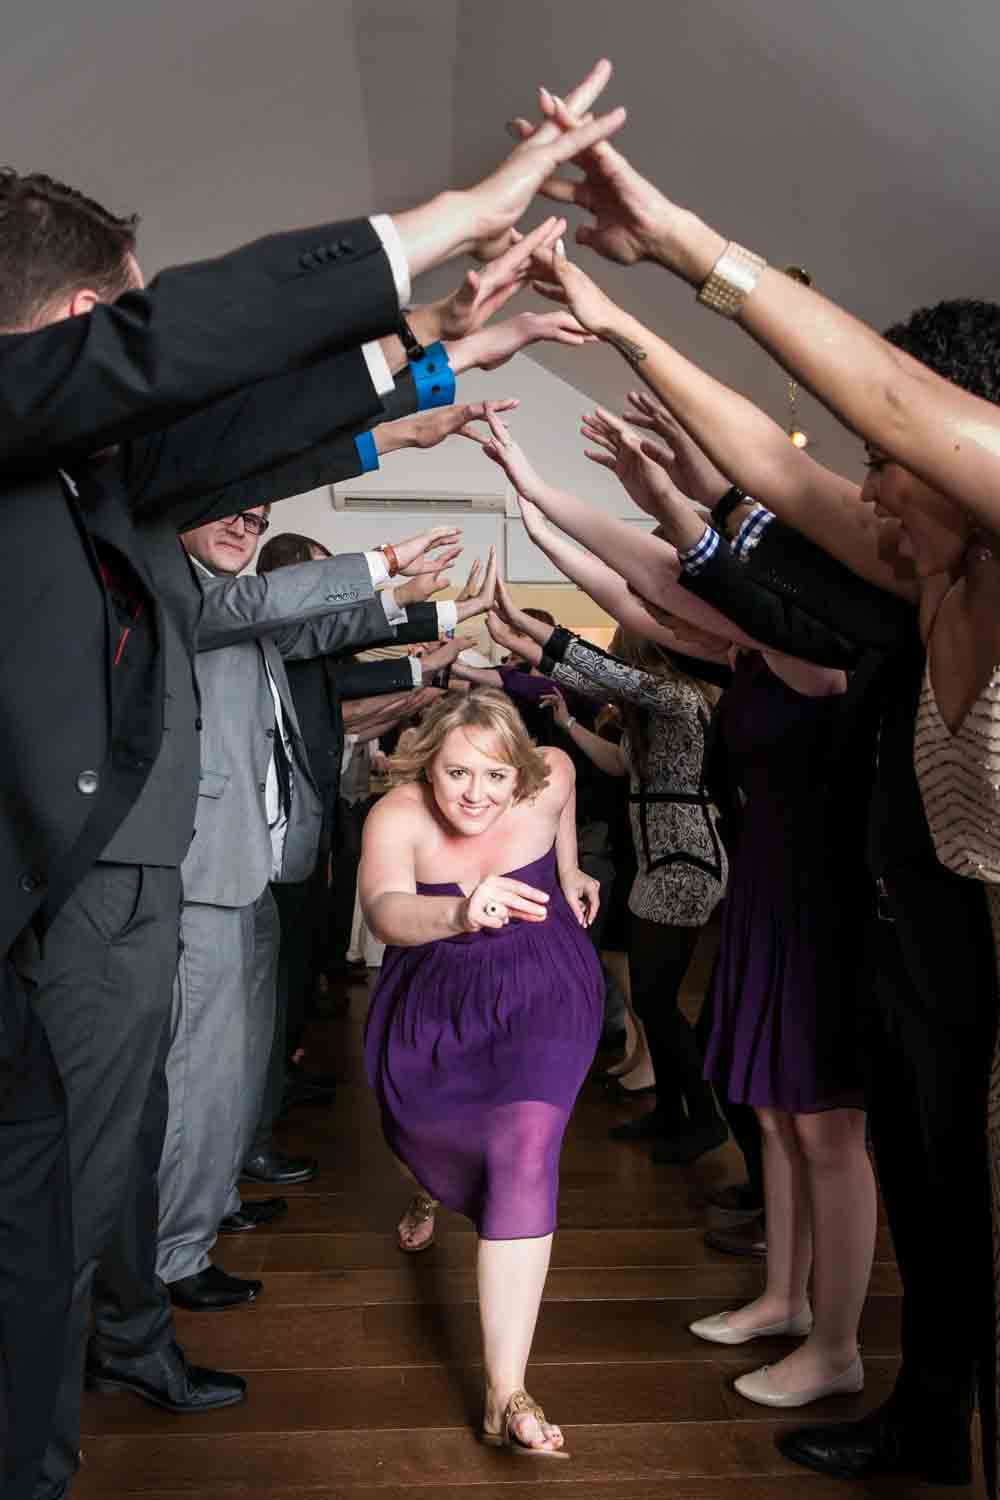 Female guest wearing purple dress running under arch of other guests' arms